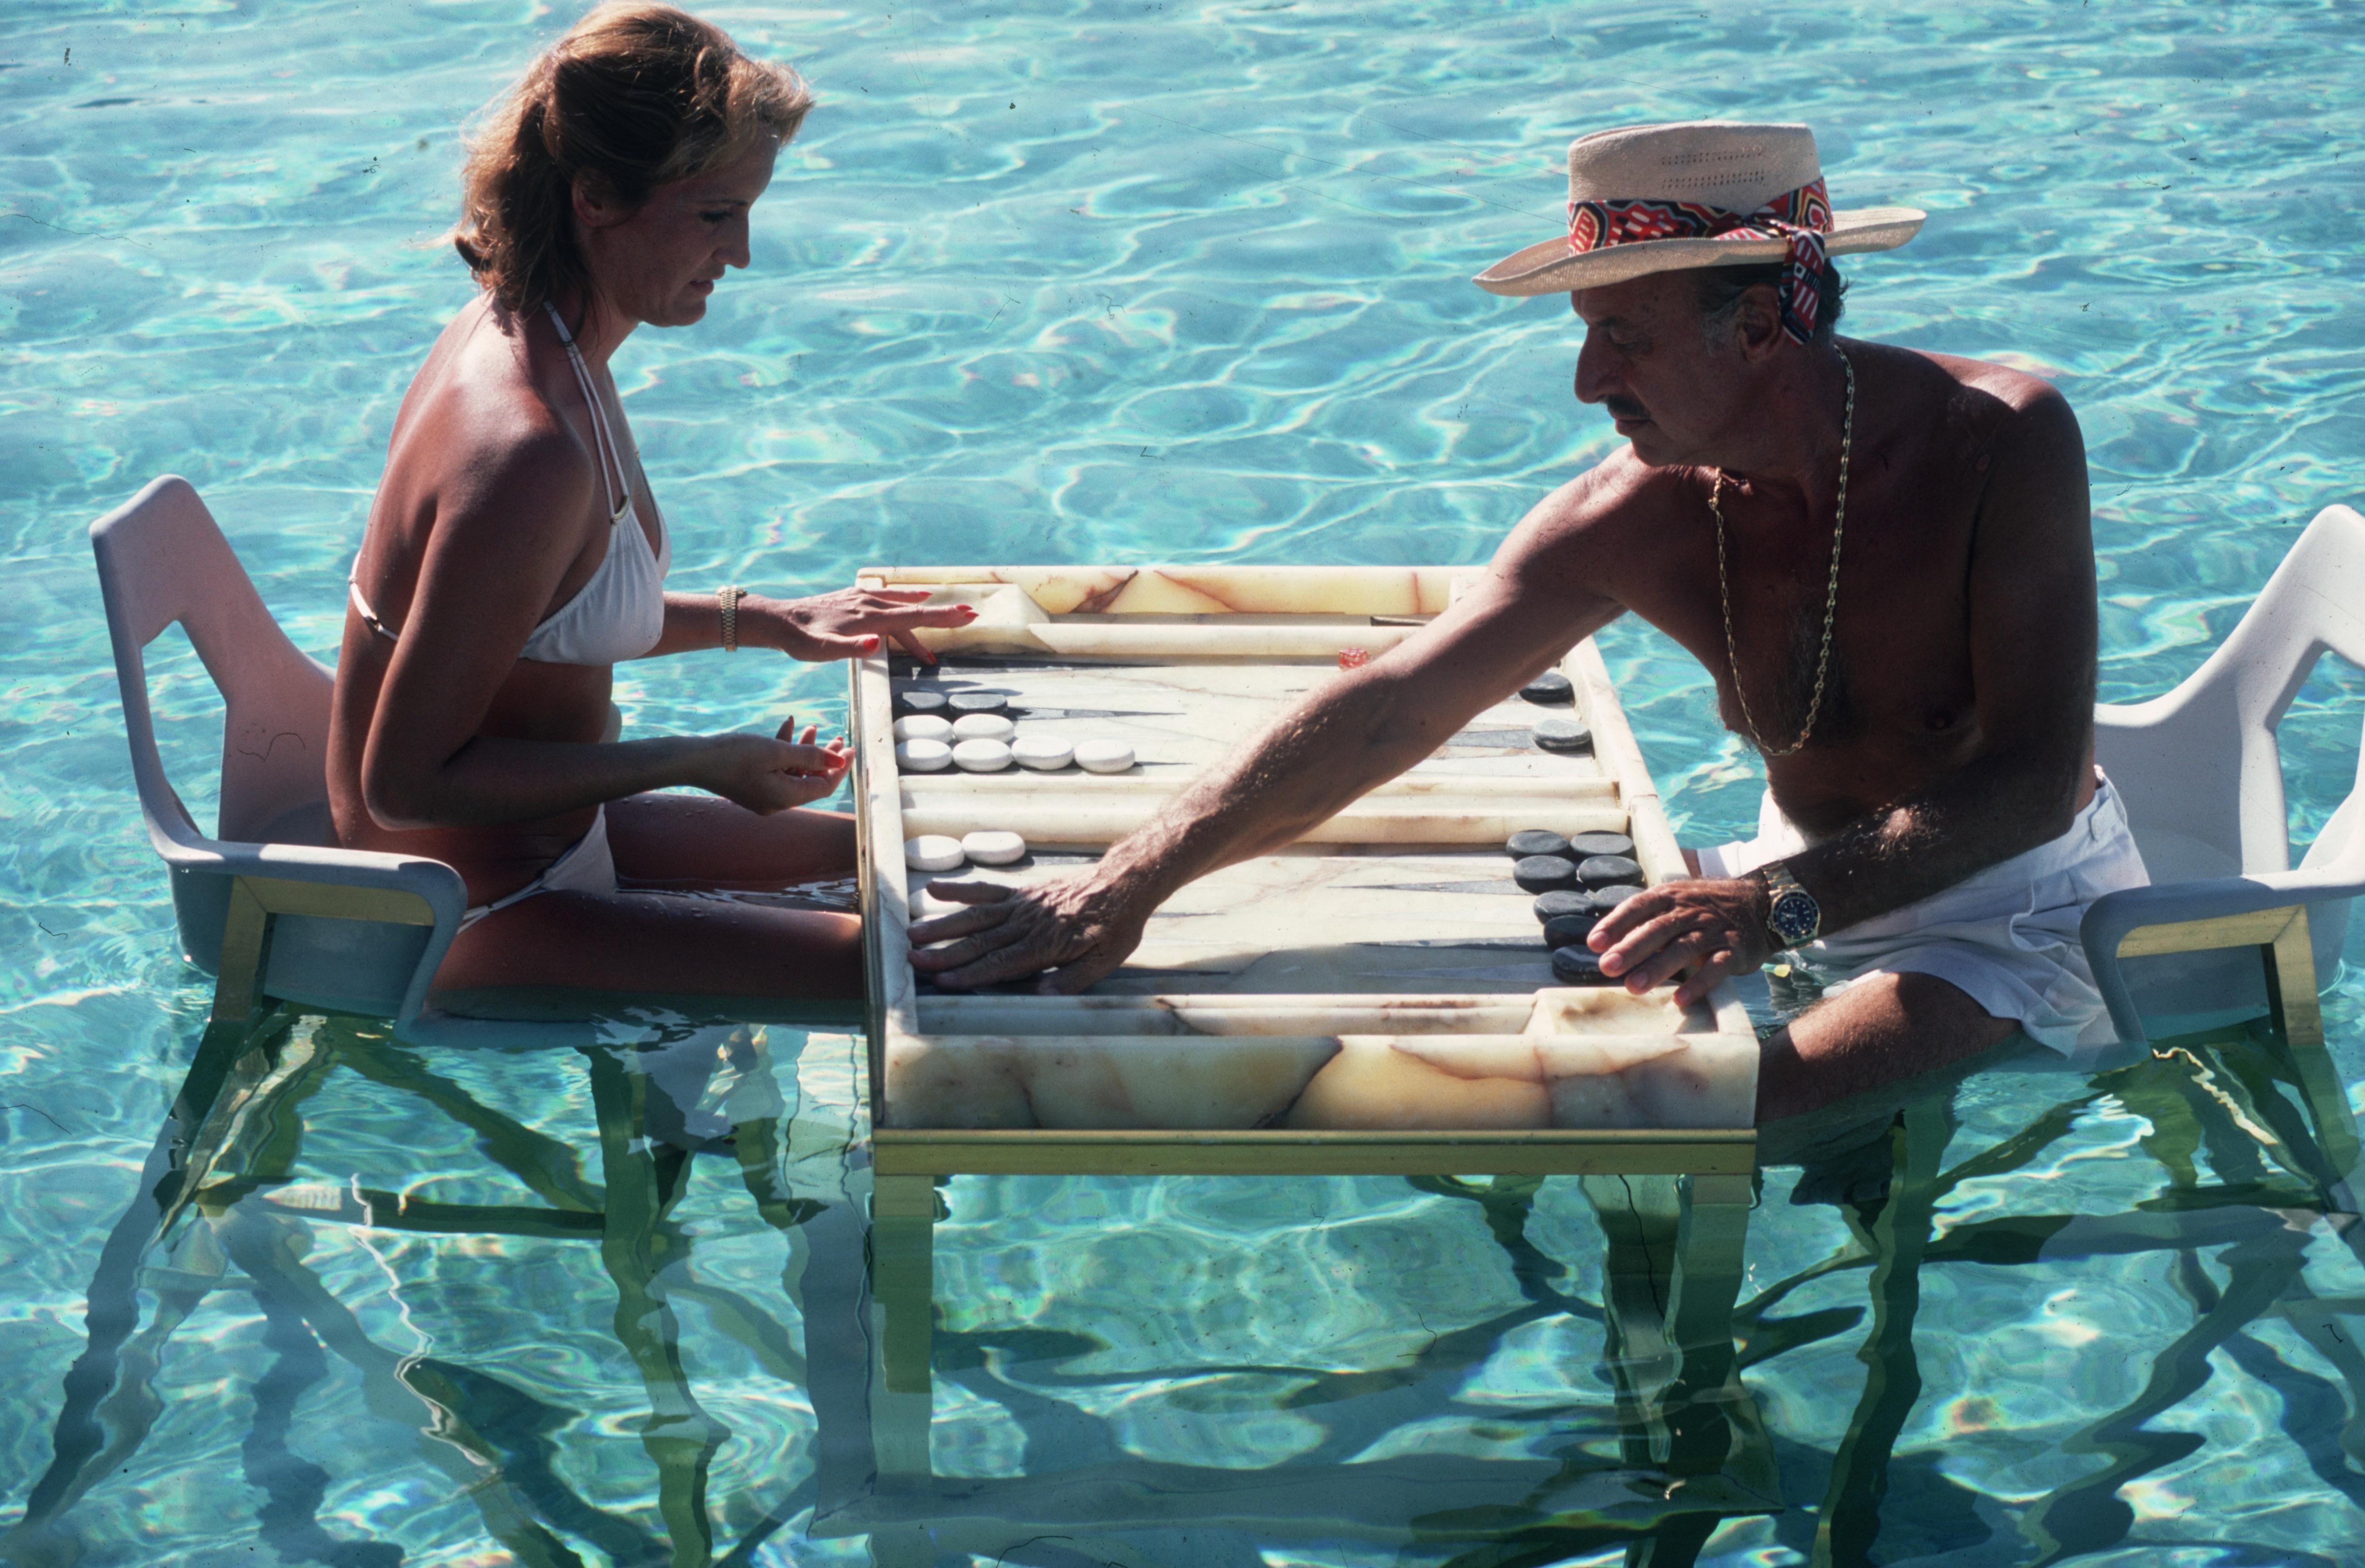 'Keep Your Cool' 1977 Slim Aarons Limited Estate Edition Print 

Carmen Alvarez enjoying a game of backgammon with Frank 'Brandy' Brandstetter in a swimming pool at Acapulco. 
(Photo by Slim Aarons/Getty Images)

Produced from the original